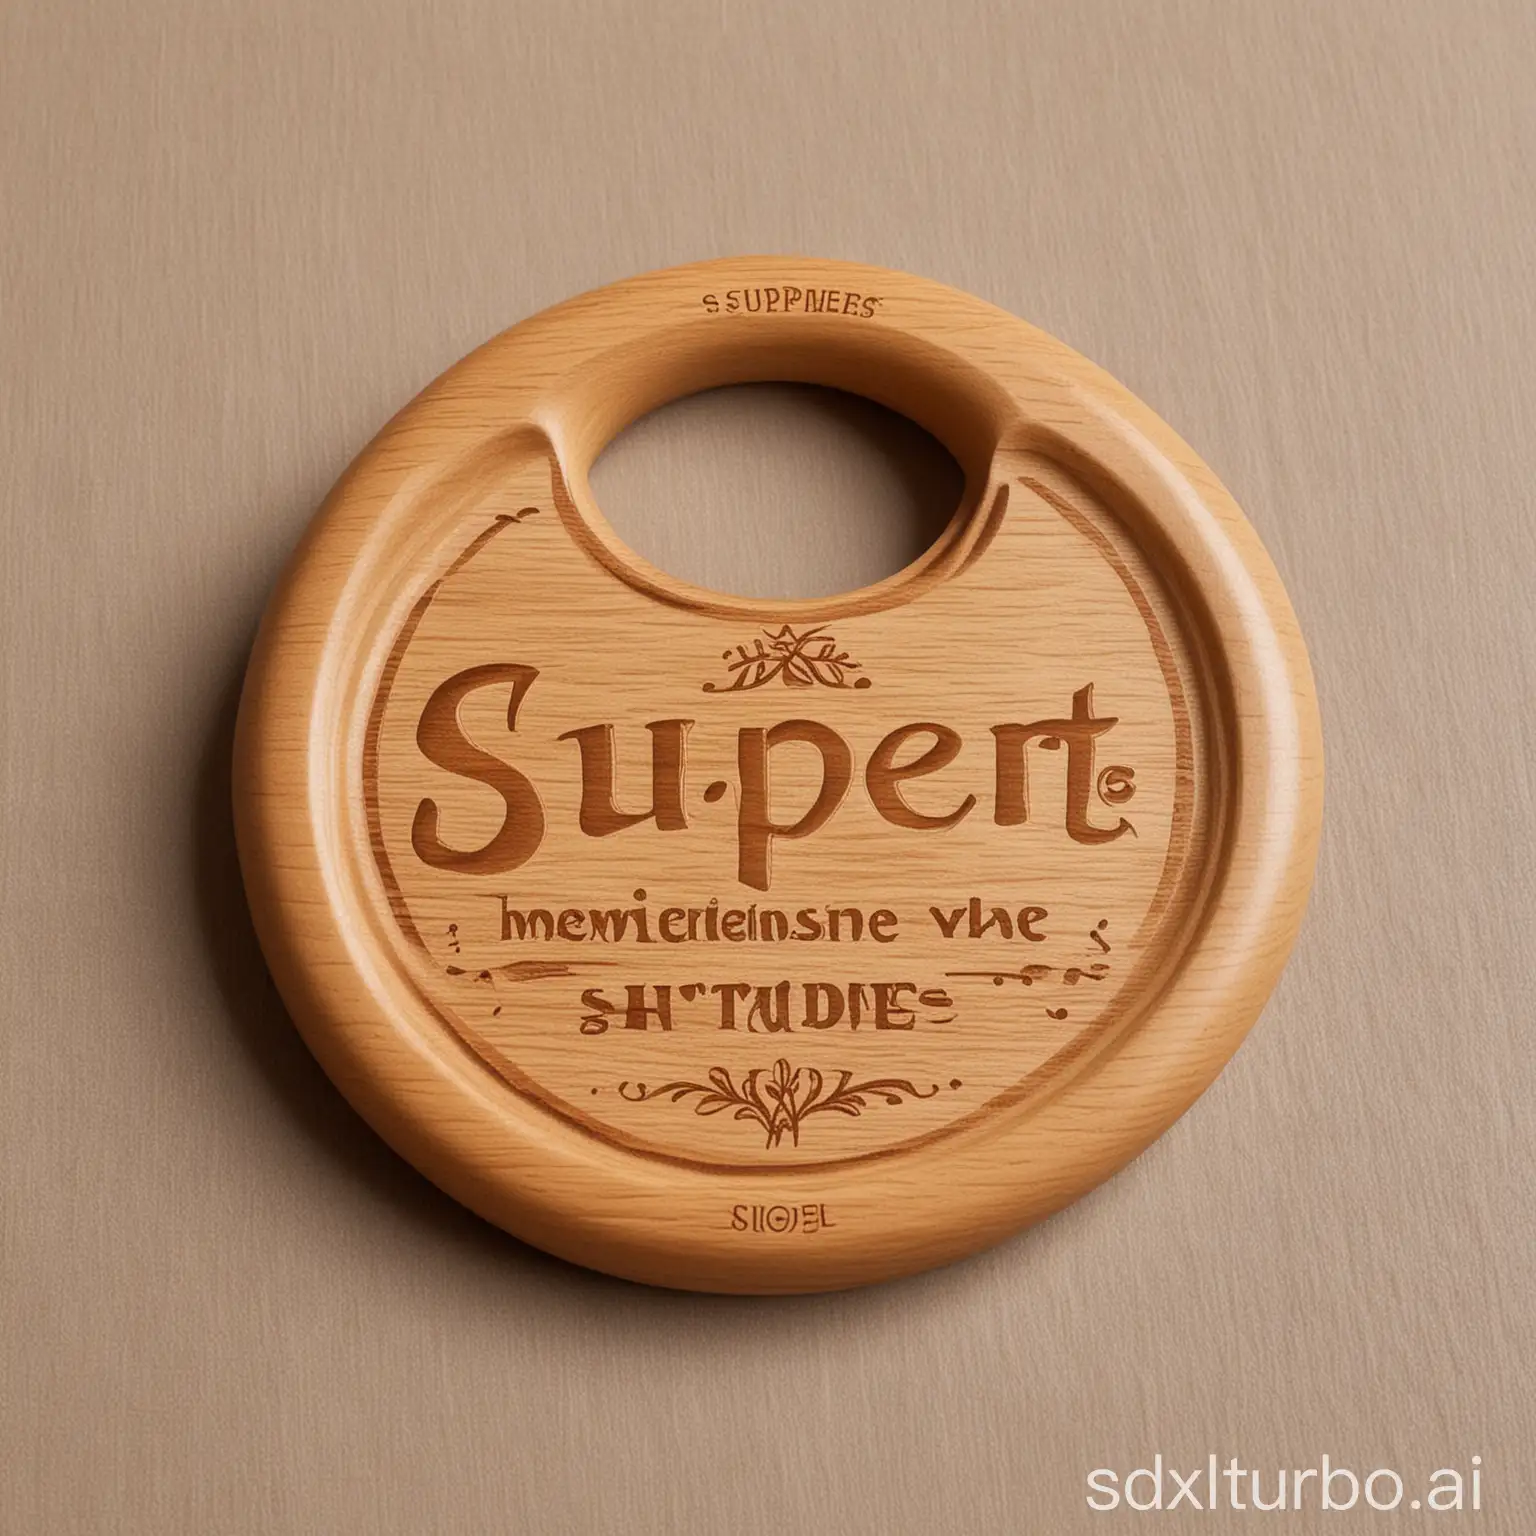 a wooden round handle, has a logo, written SUPPER, font square